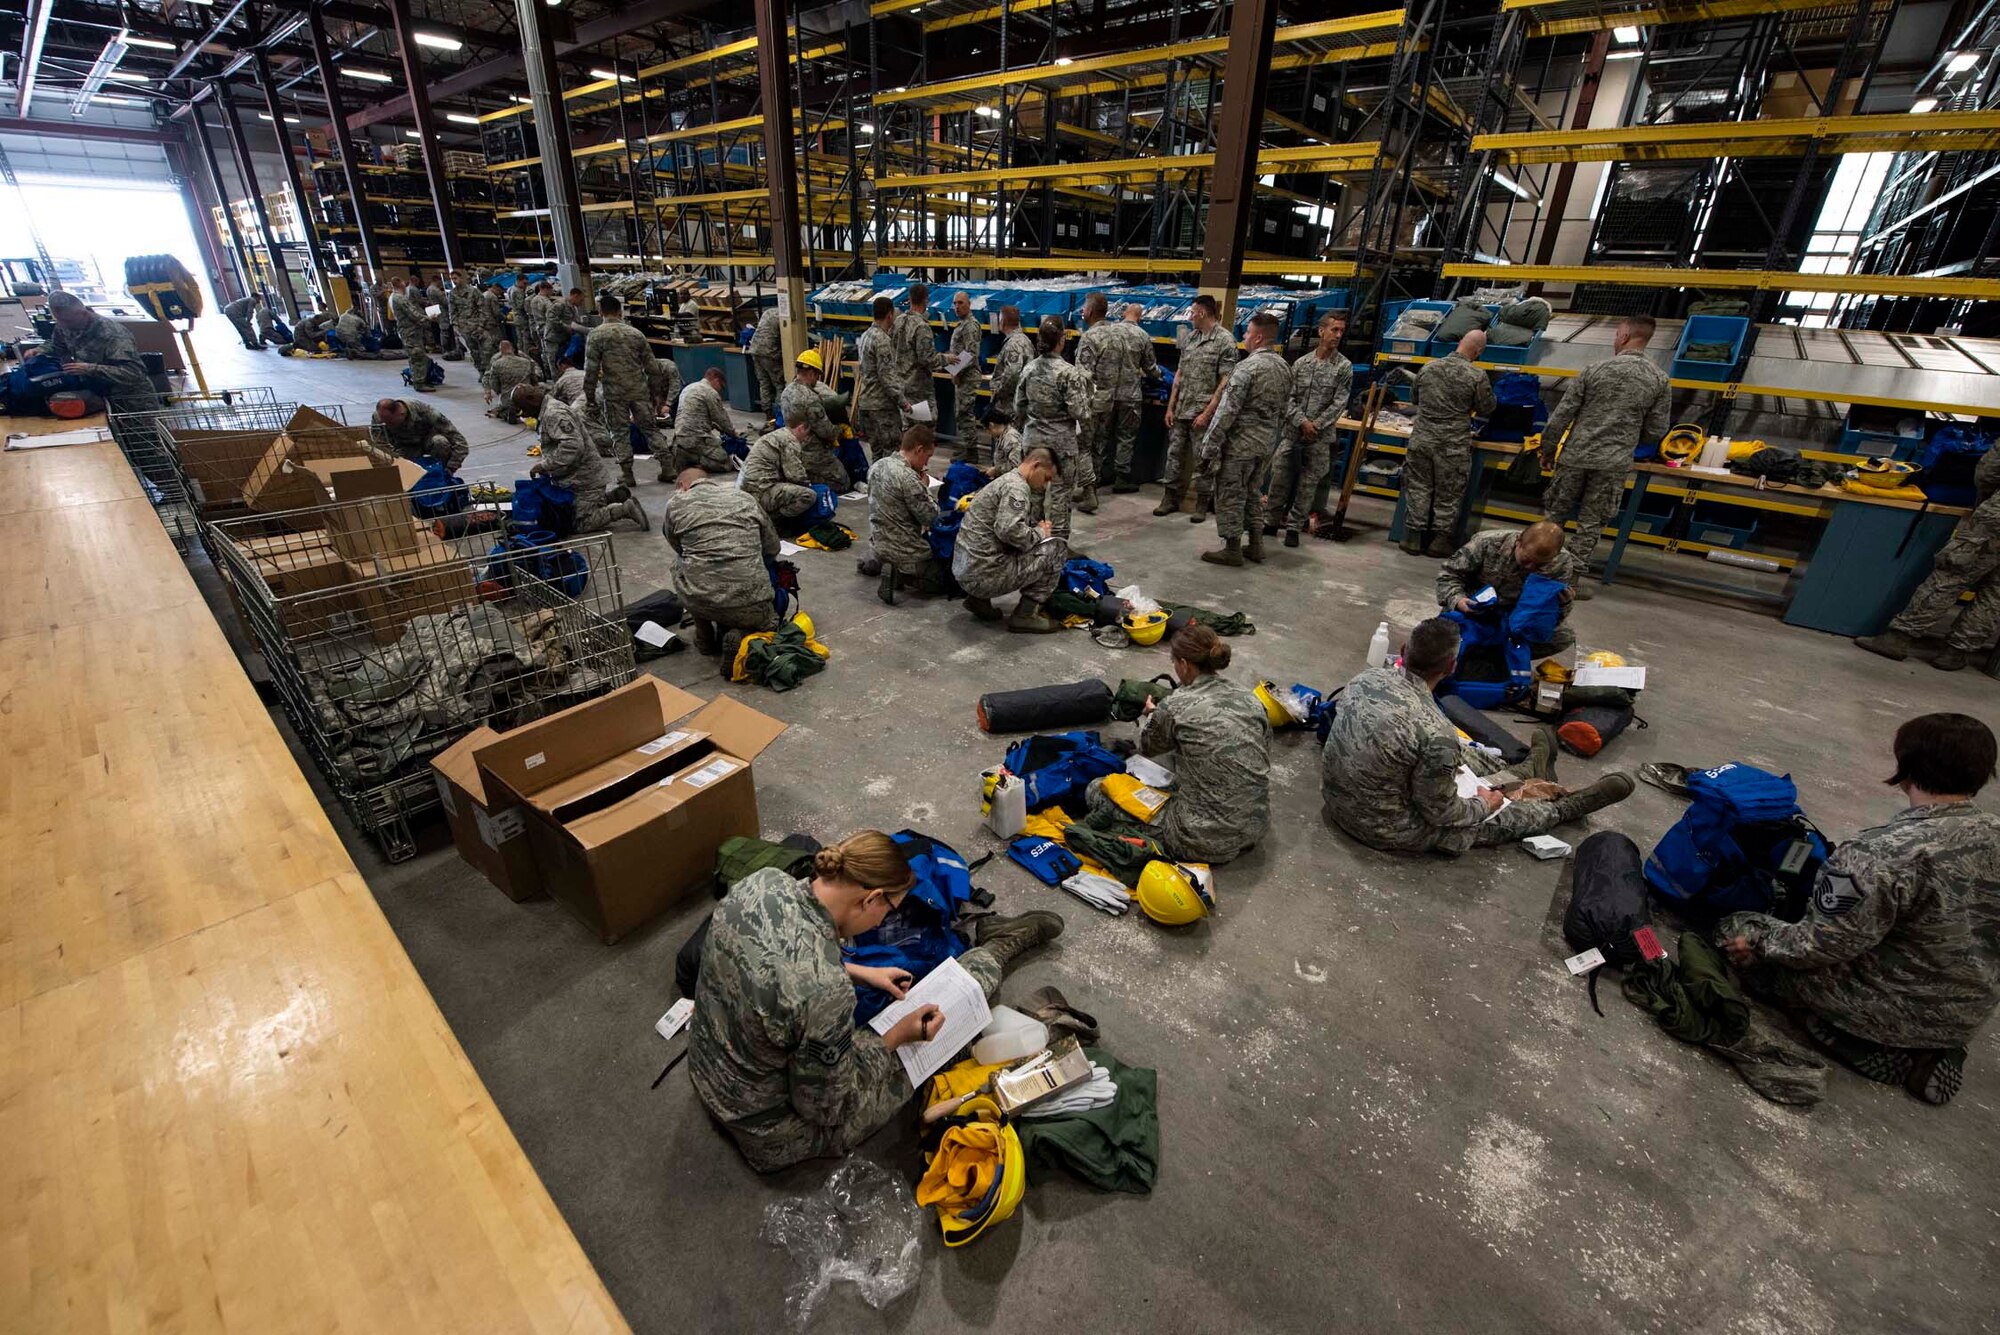 Airmen from the 141st Air Refueling Wing prepare their emergency response and fire equipment bags during a statewide activation of Air and Army National Guard personnel in support of firefighting efforts in eastern Washington August 1, 2018. Gov. Jay Inslee activated National Guard personnel to assist in firefighting efforts throughout the region.  (U.S. Air National Guard photo by Staff Sgt. Rose M. Lust)